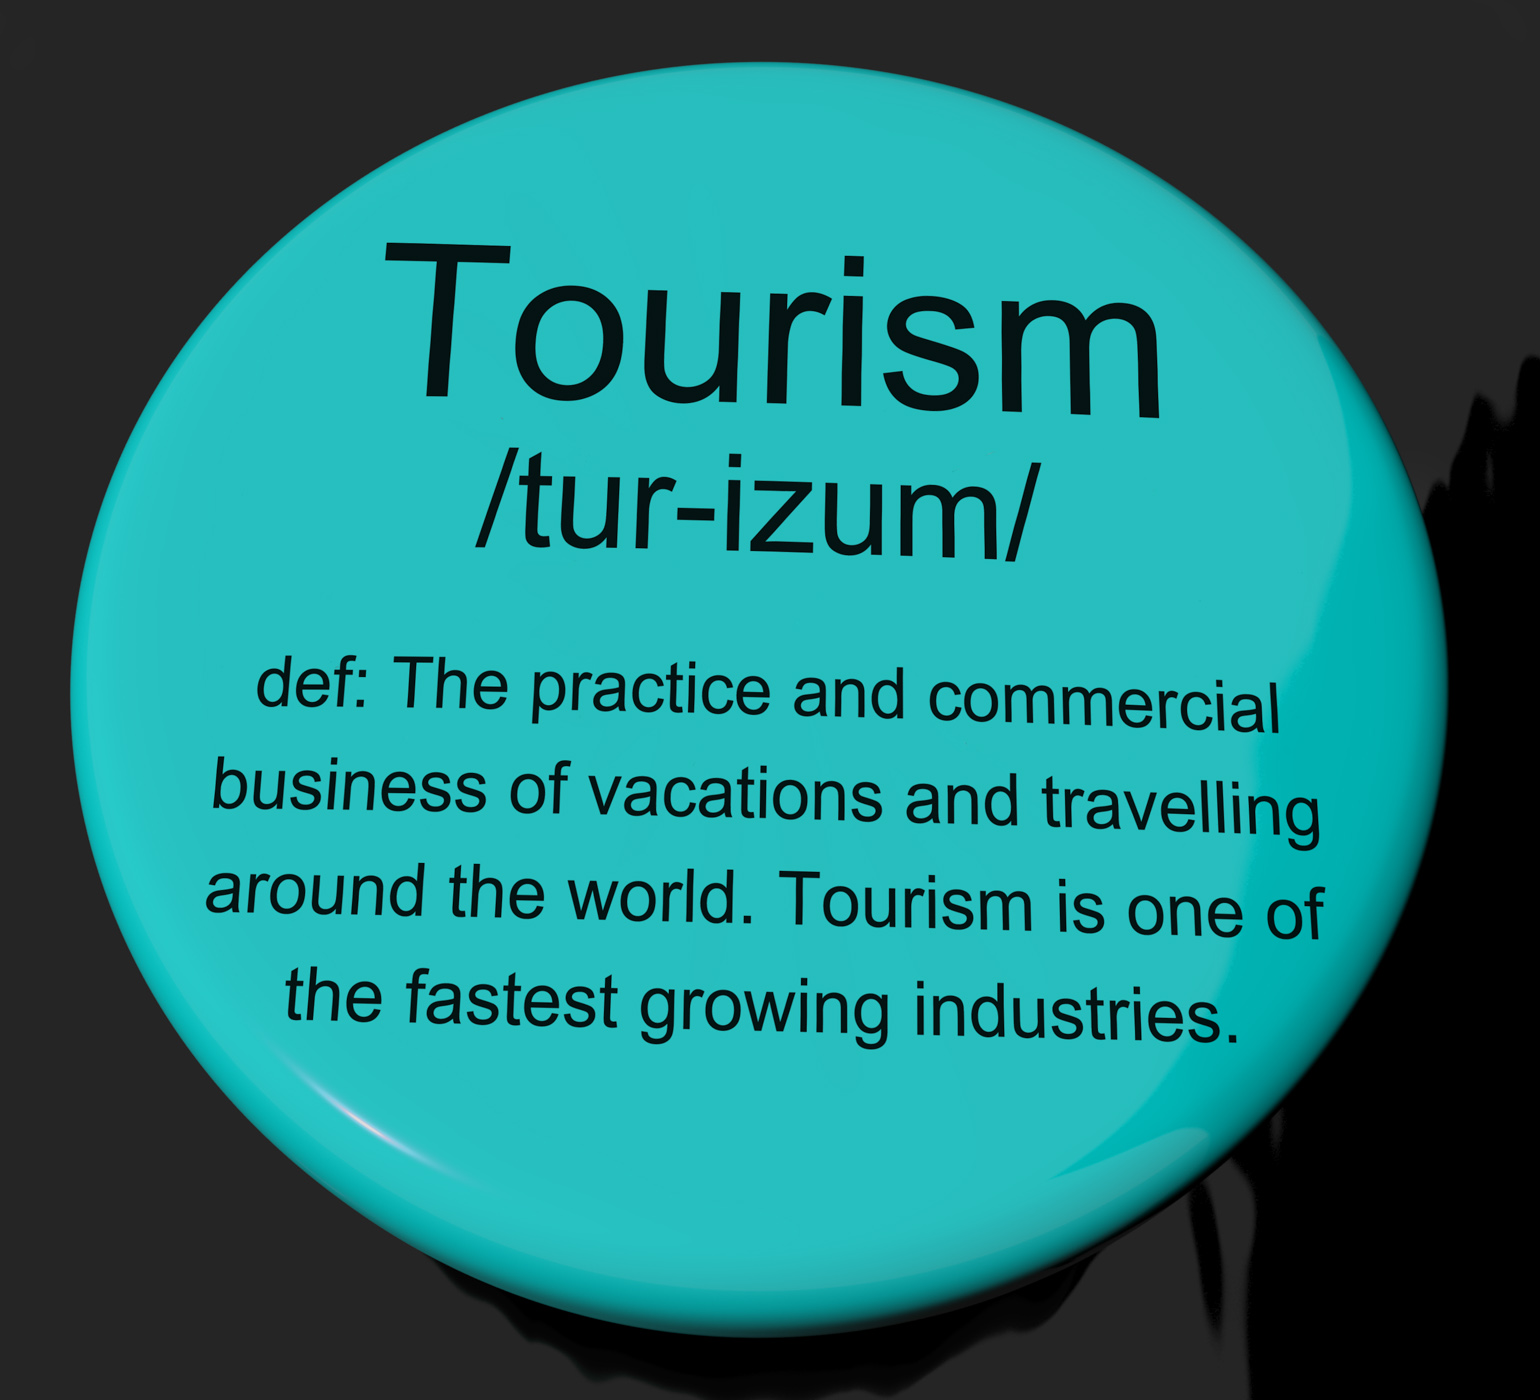 Tourism definition button showing traveling vacations and holidays photo